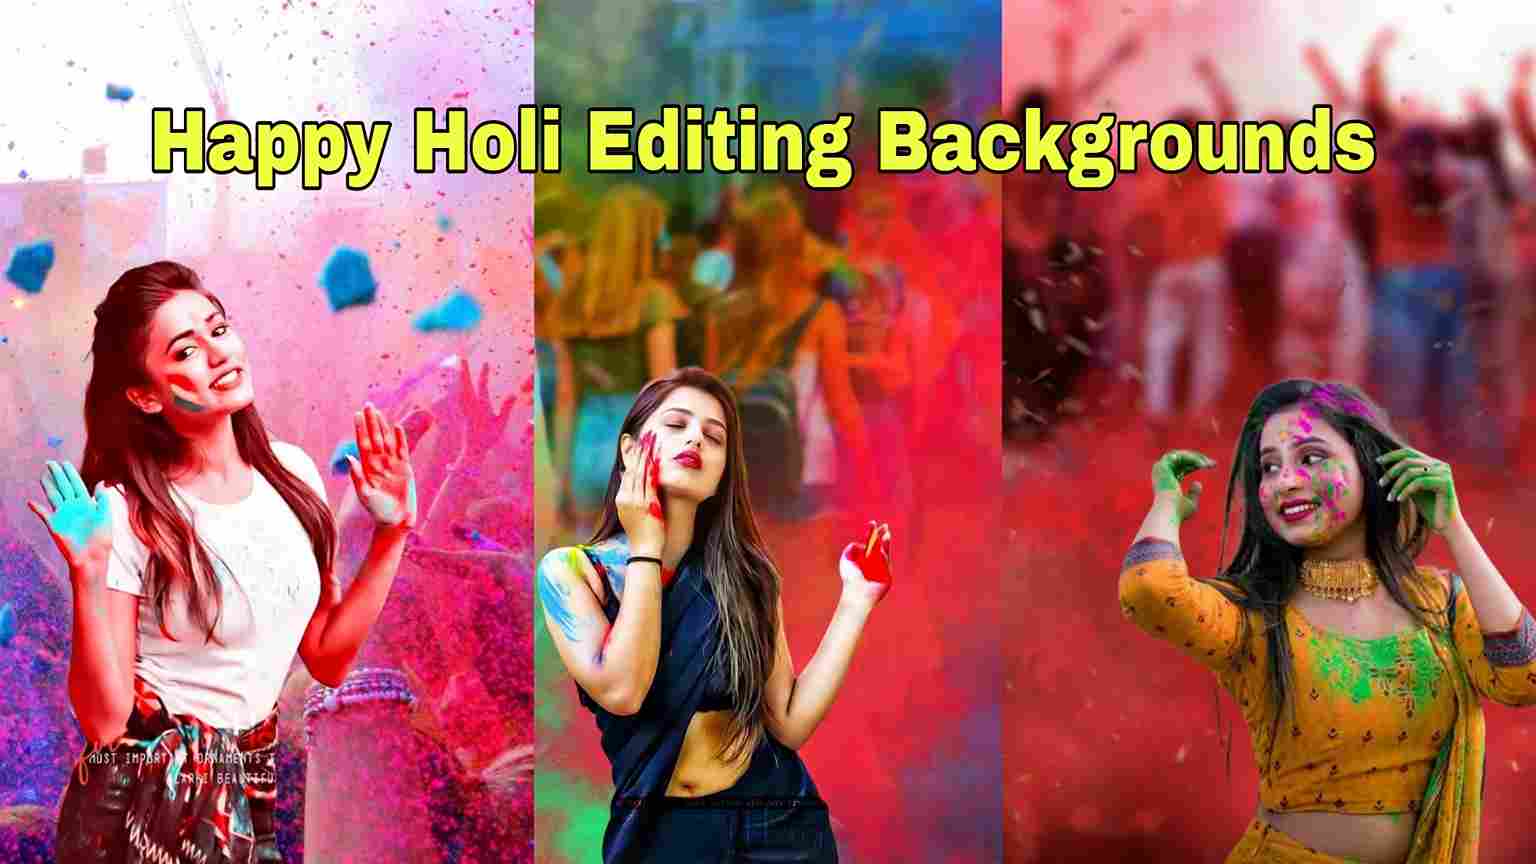 Happy Holi Photo Editing Background Images | Holi Special Backgrounds for PicsArt